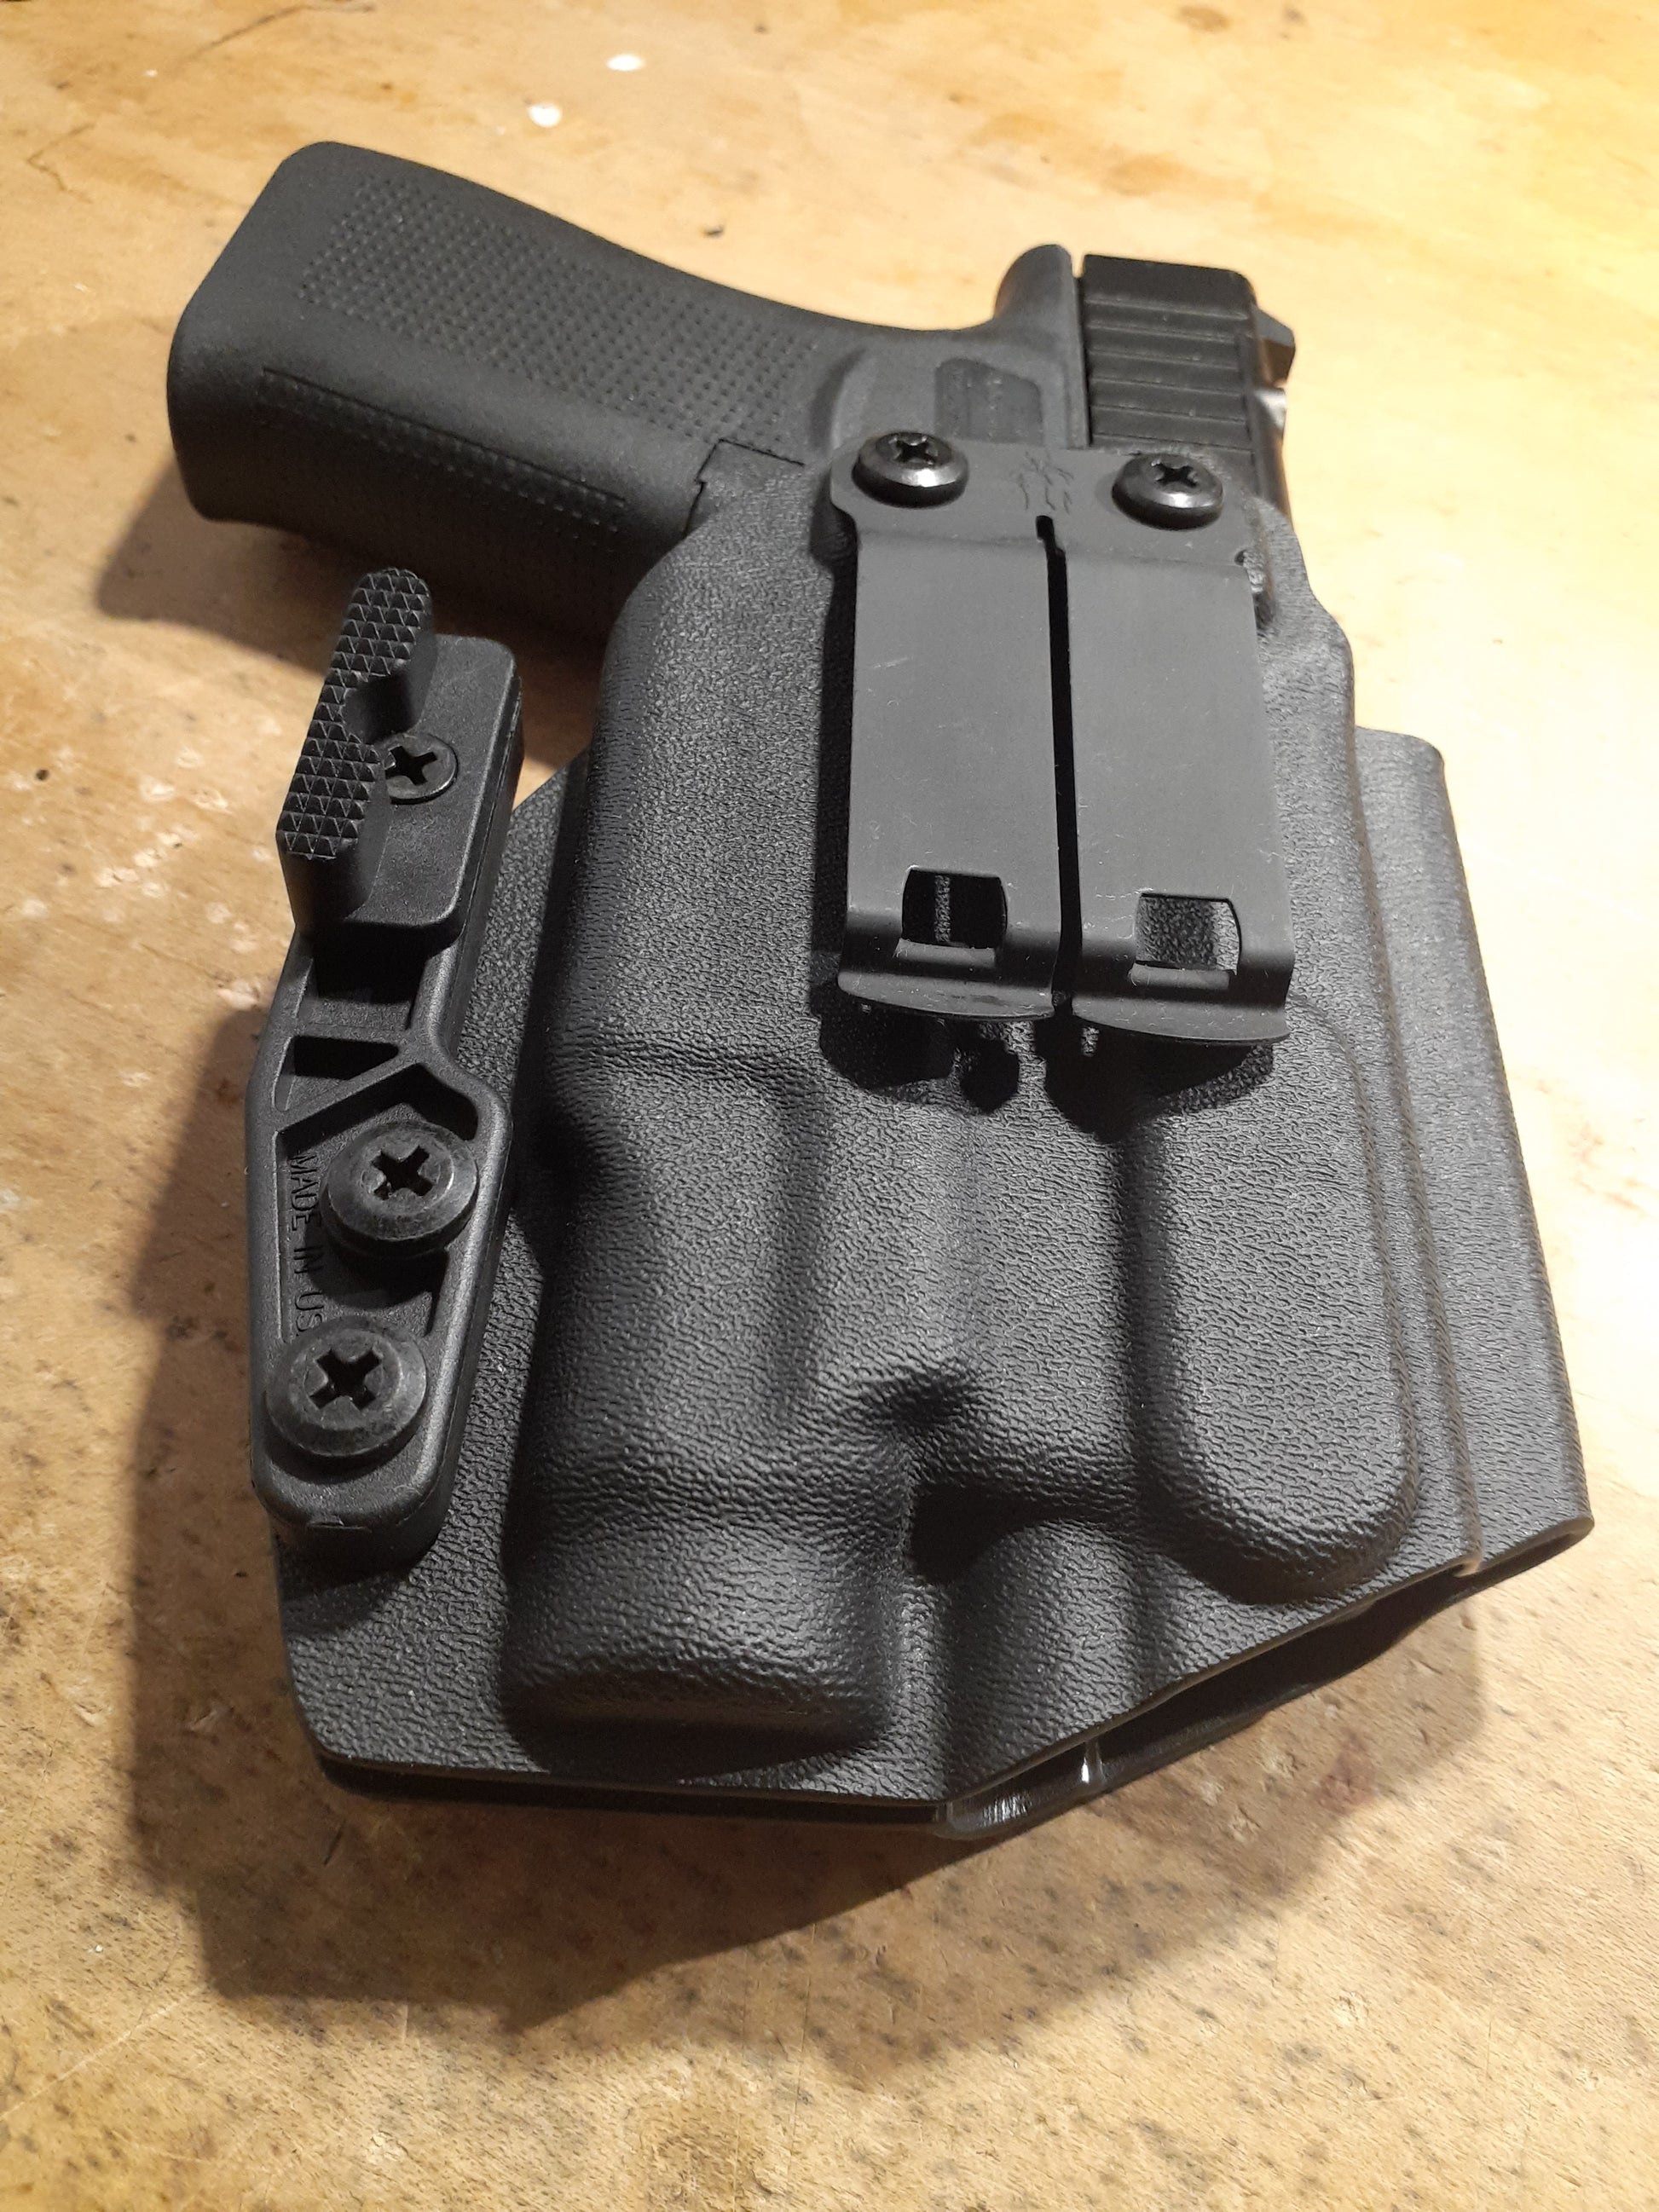 Inside the waistband holster compatible with Glock and tlr7 sub light